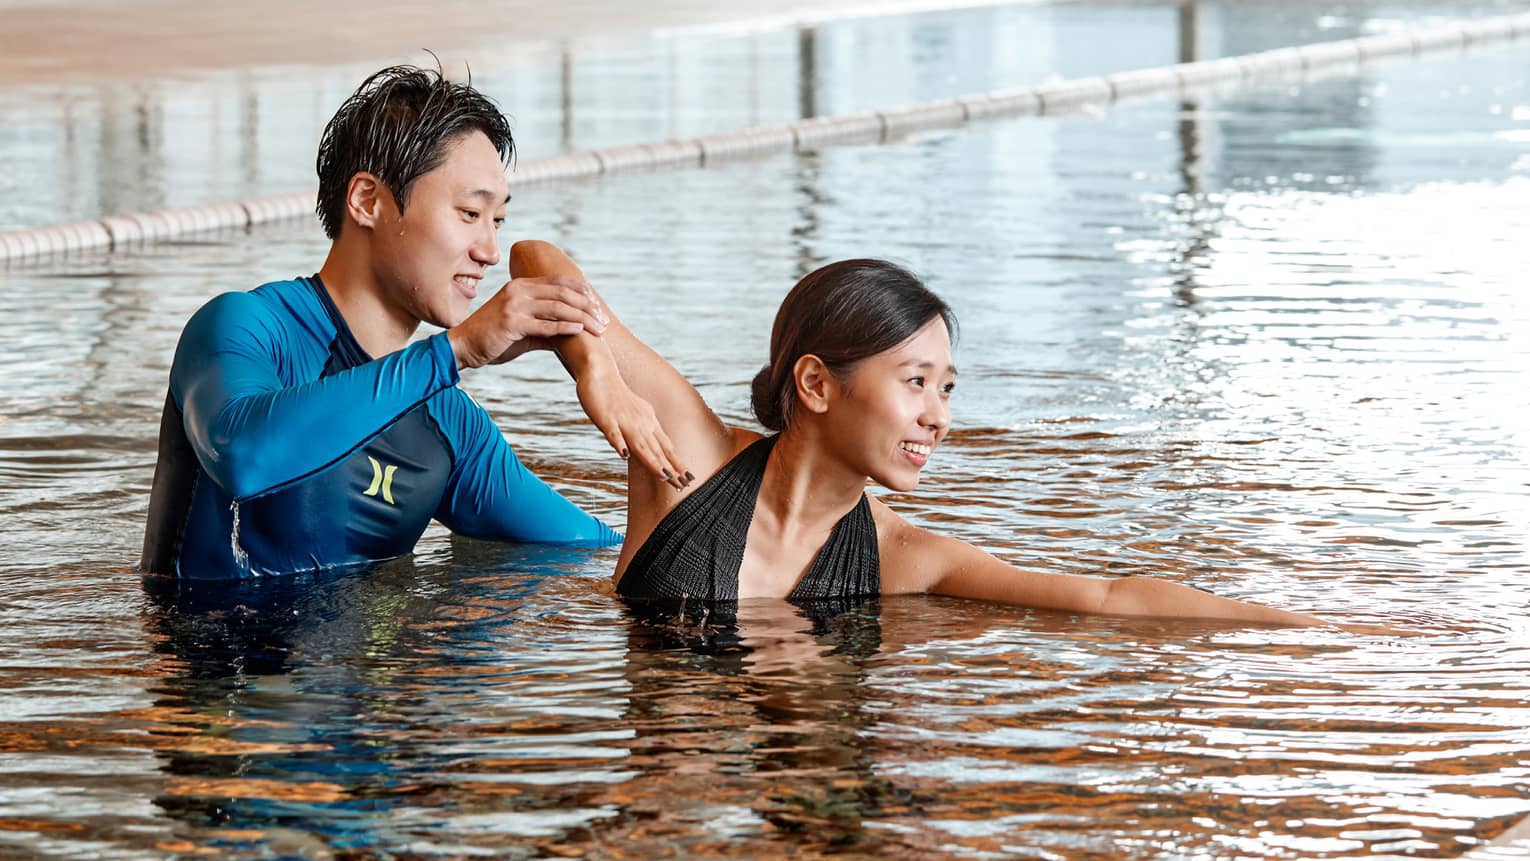 Swimming instructor helps woman position arm in indoor swimming pool